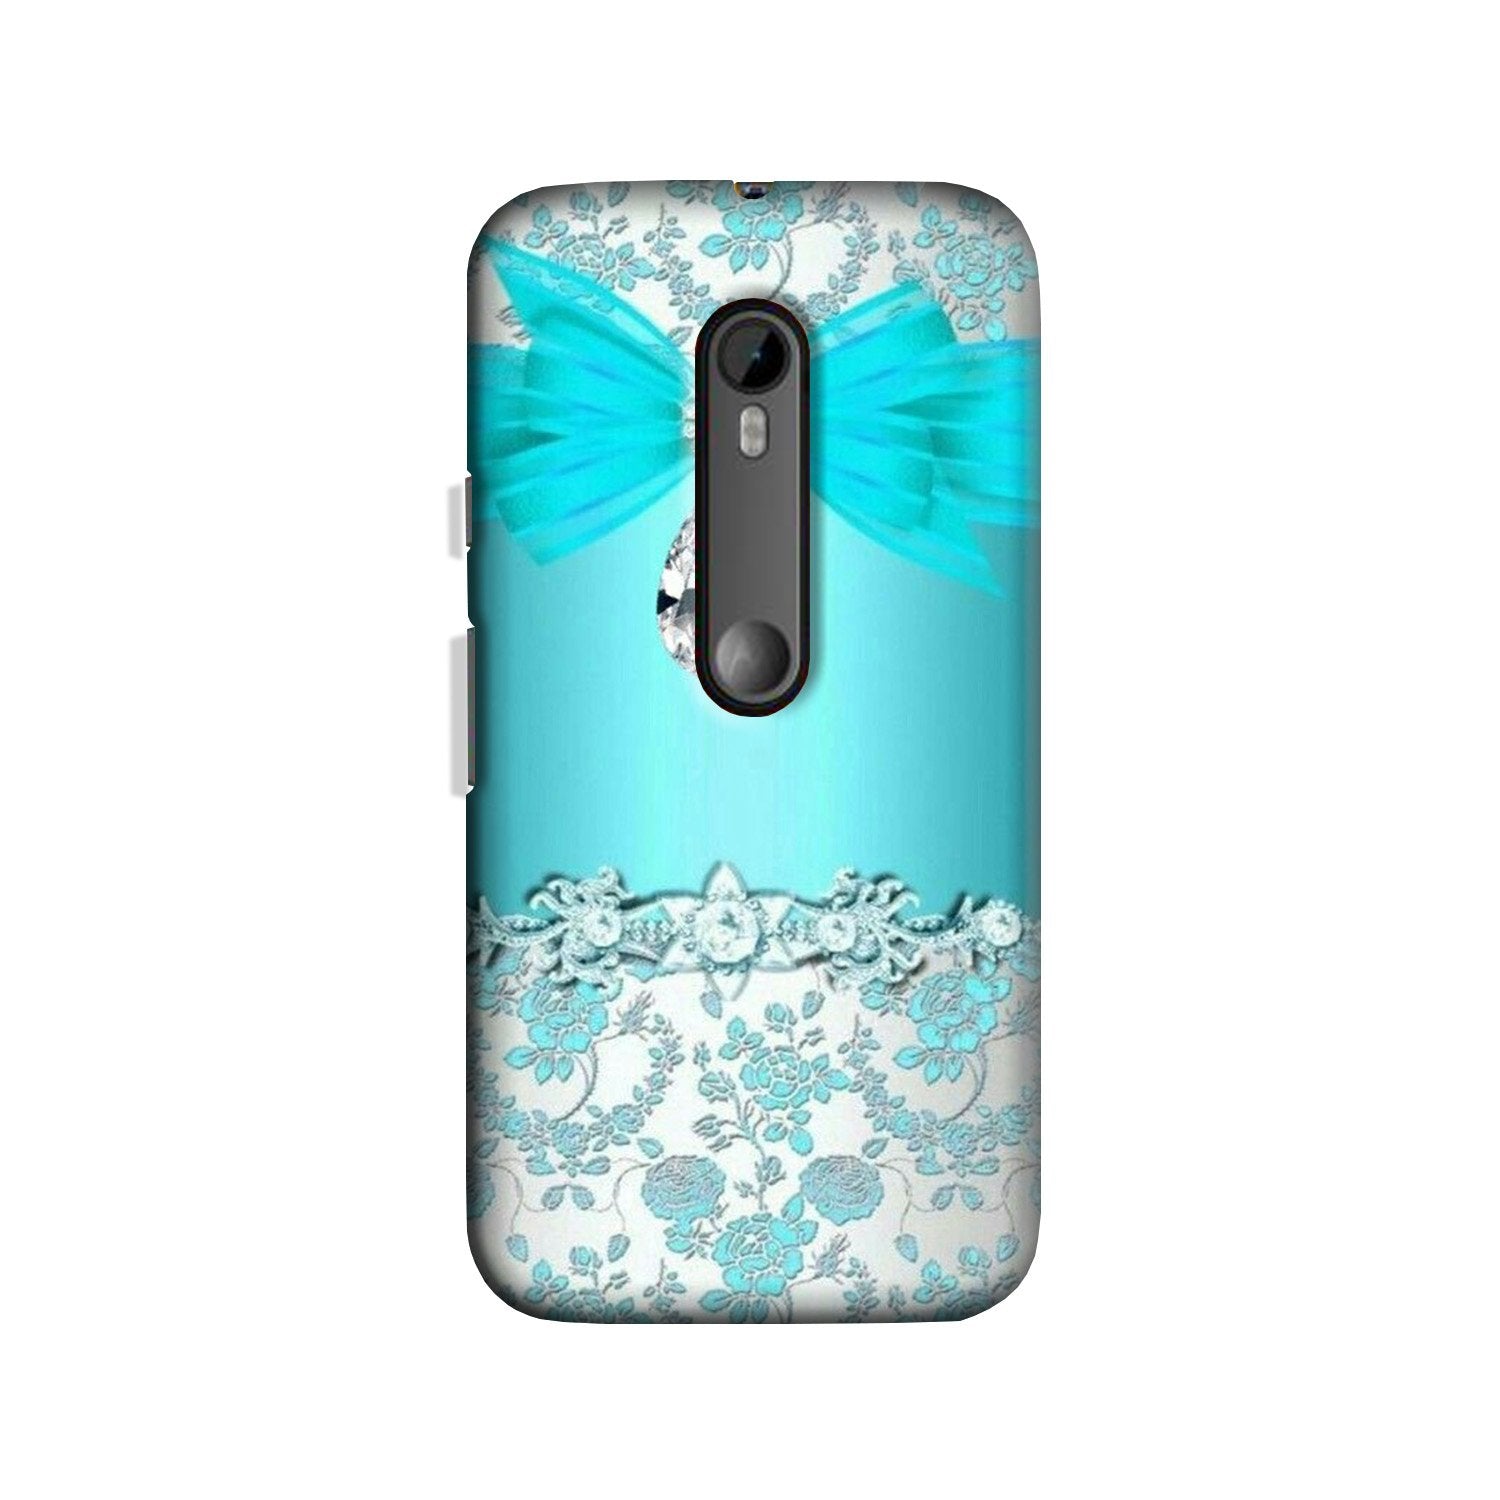 Shinny Blue Background Case for Moto X Force